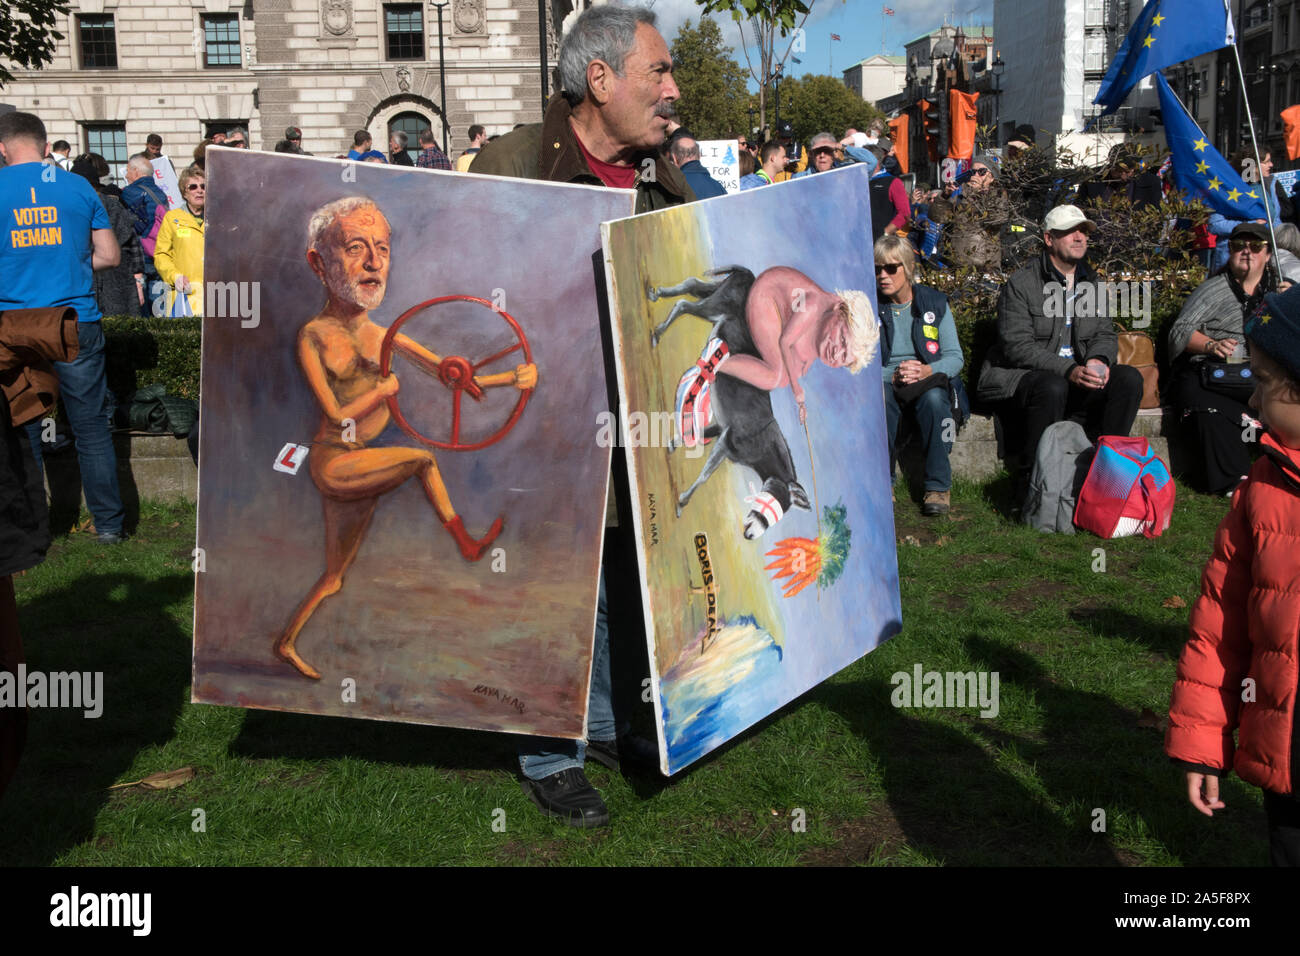 Kaya Mar Turkish artist political cartoonist with his paintings of Jeremy Corbyn and Boris Johnson. 2019 London UK. Demonstration in parliament Square for Peoples Vote Campaign. HOMER SYKES Stock Photo